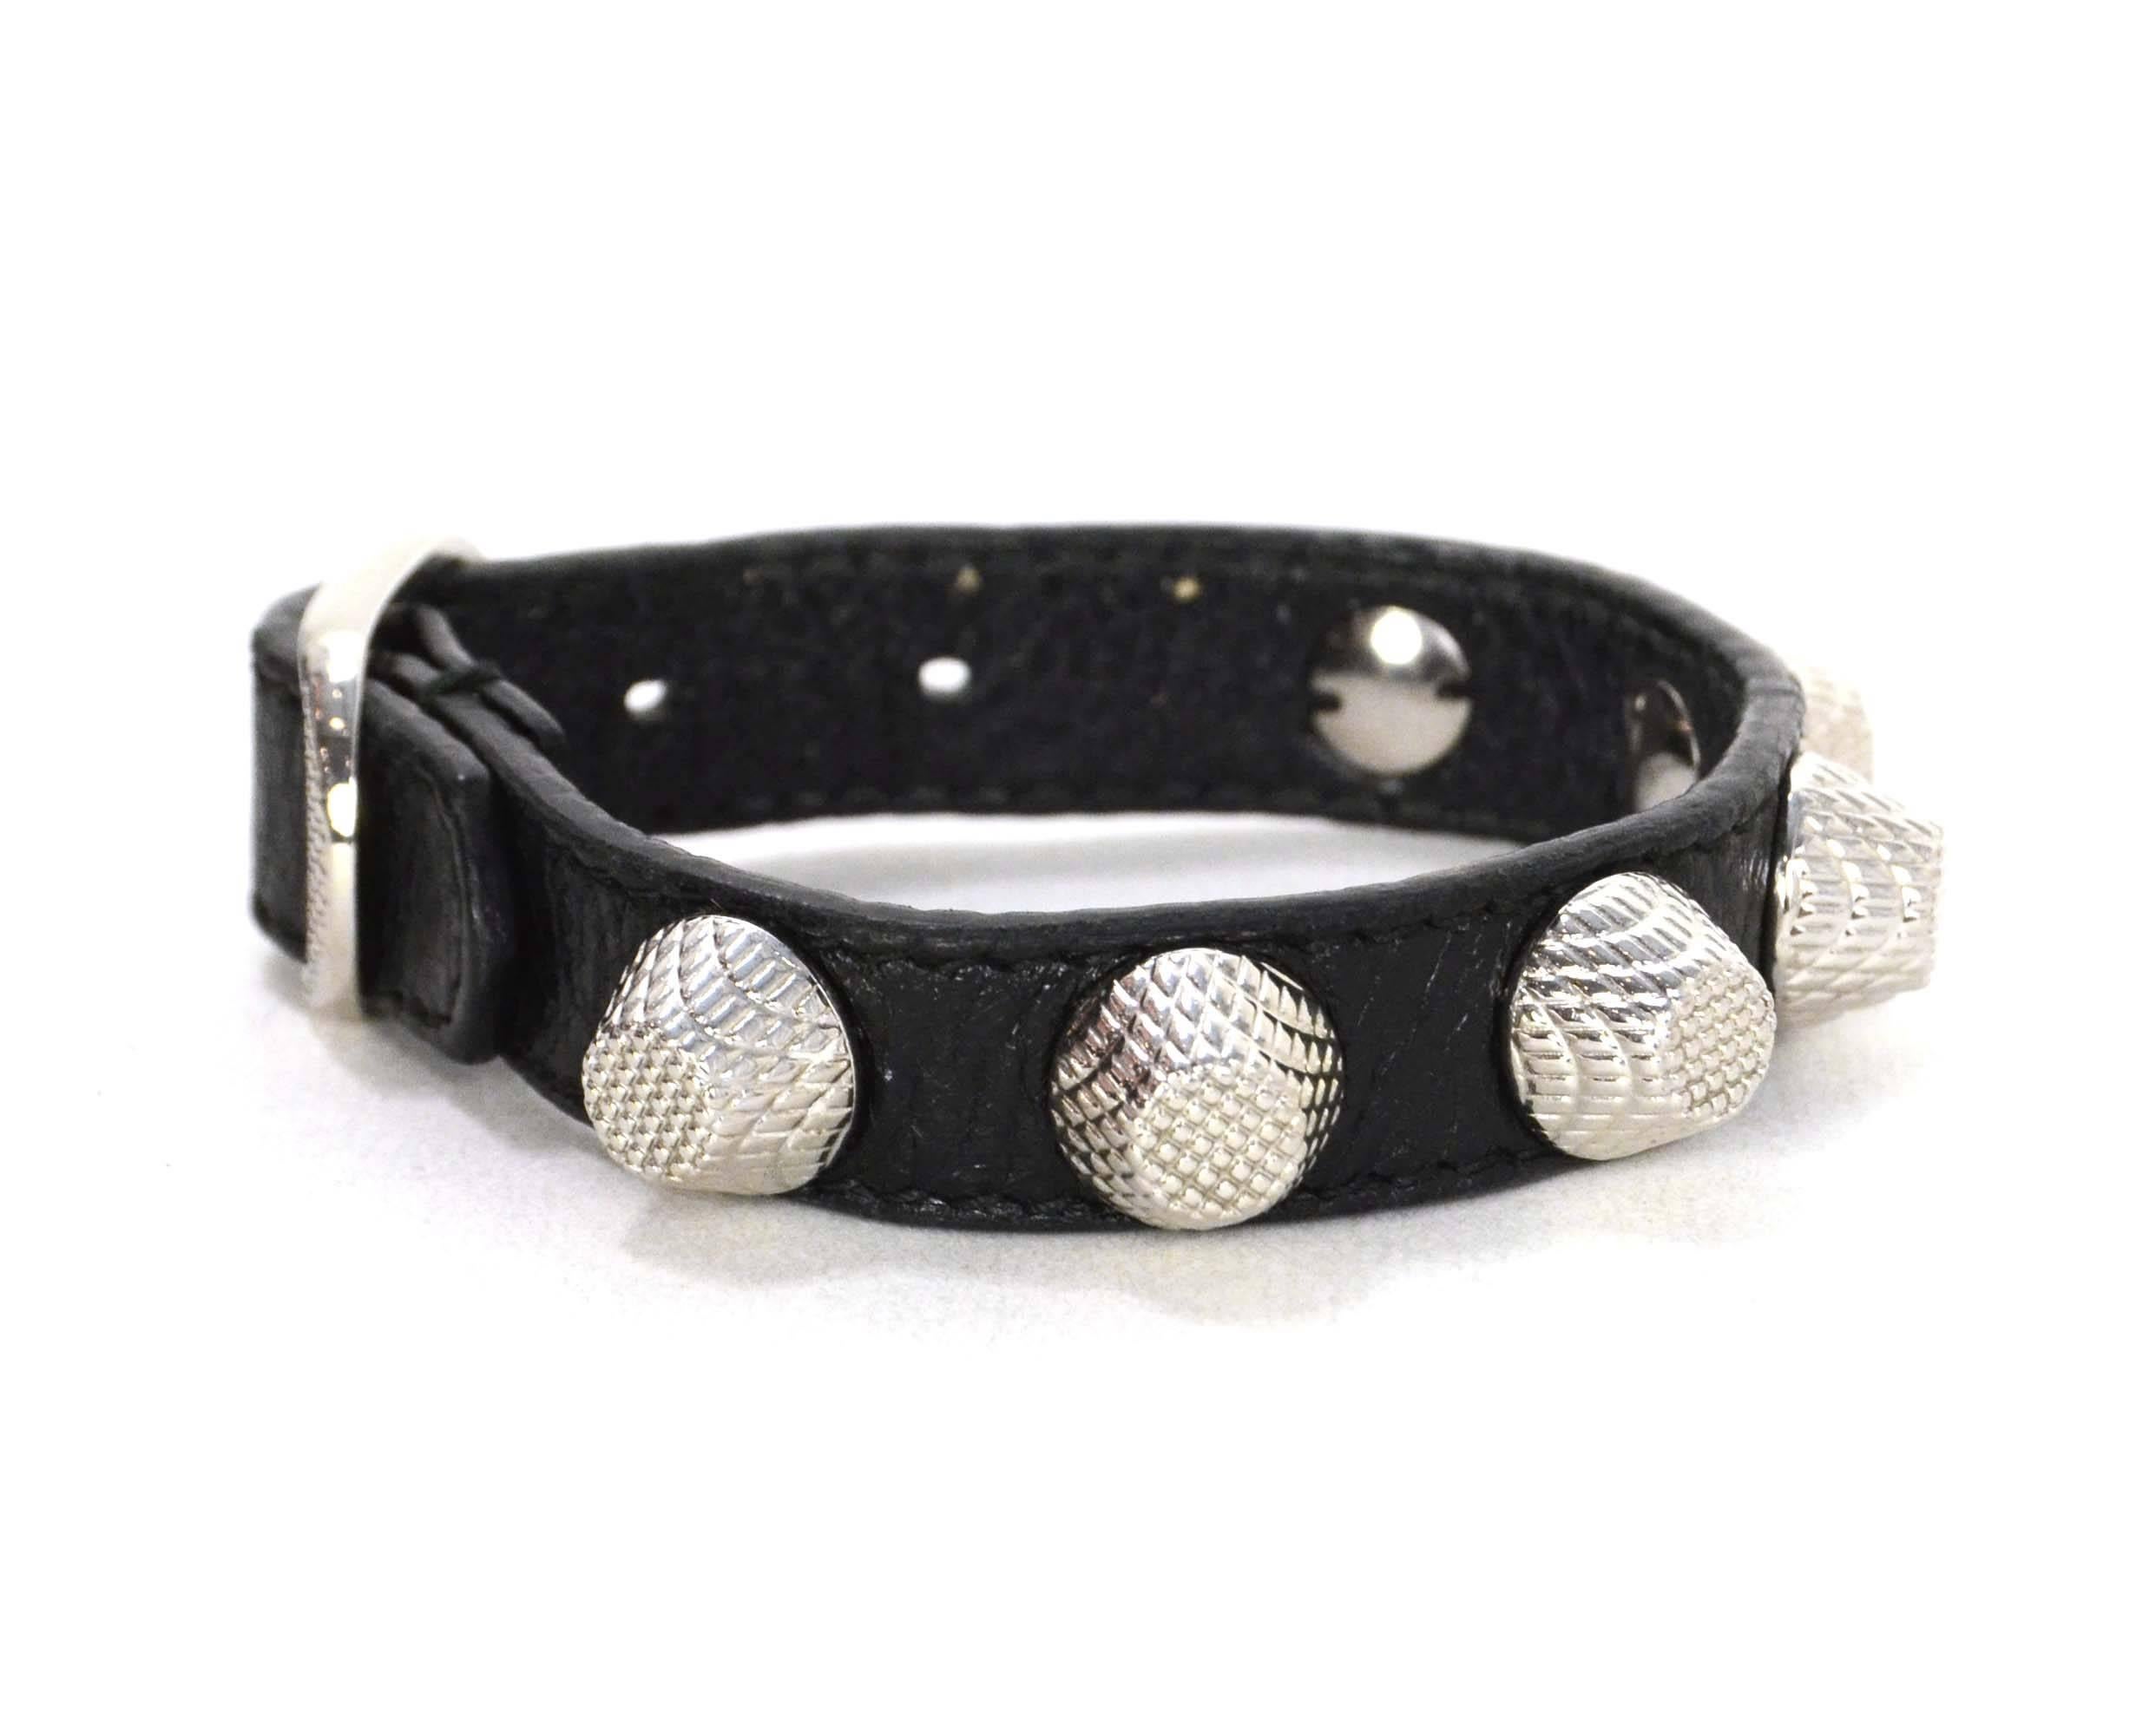 Balenciaga Black Leather  Studded Bracelet
Features distressed leather
Color: Black and silvertone
Hardware: Silvertone
Materials: Distressed leather and metal
Closure: Buckle and notch closure
Retail Price: $245 + tax
Overall Condition: